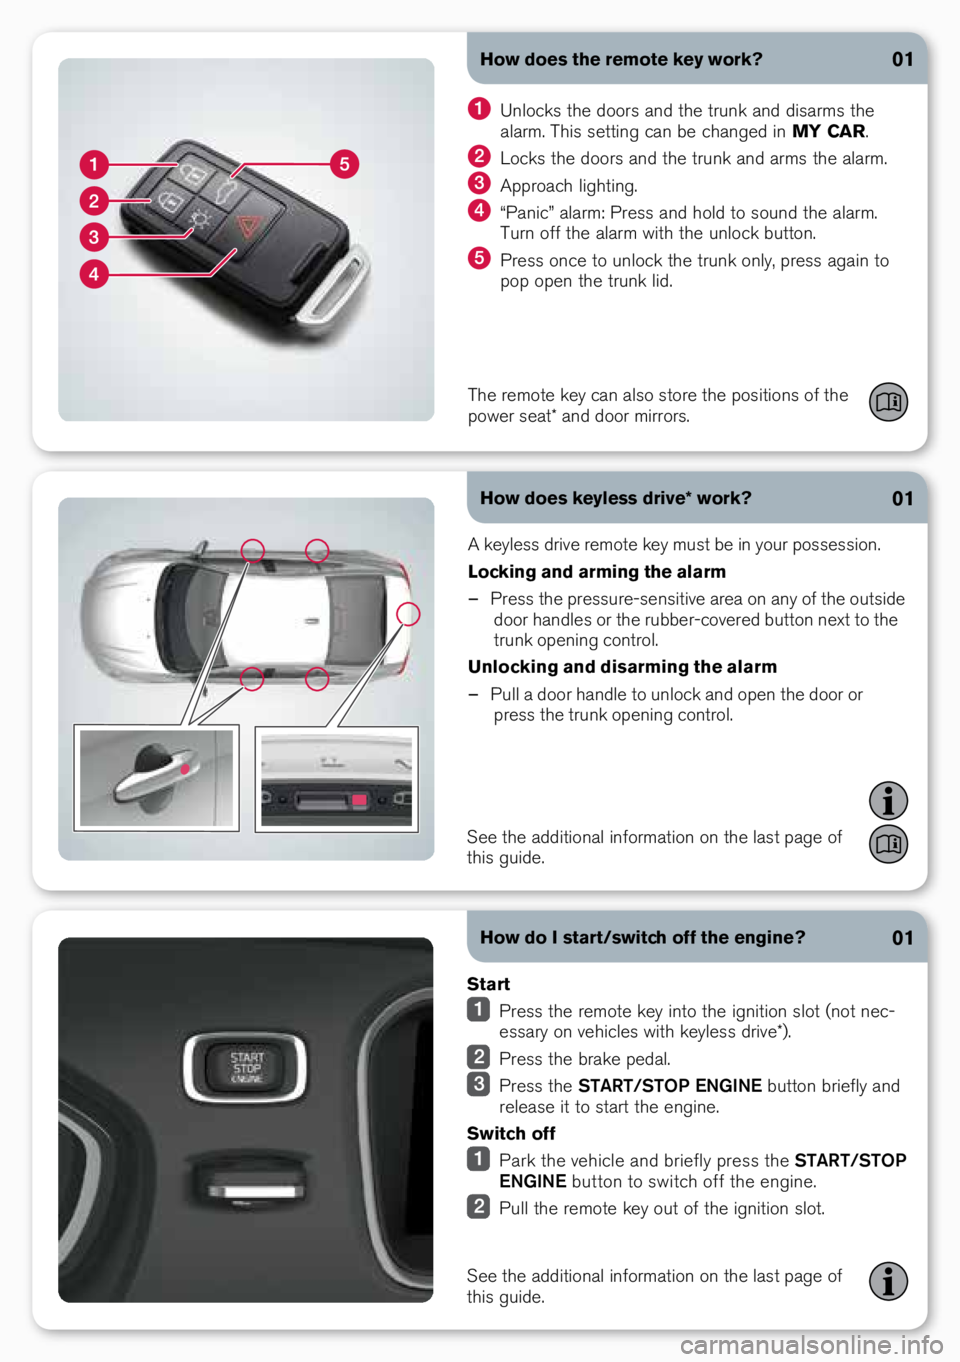 VOLVO S60 2016  Quick Guide How does the remote key work?
How does keyless drive* work?01
01
A keyle\f\f drive rem\bte key mu\ft be in y\bur p\b\f\fe\f\fi\bn.
Locking and arming the alarm 
– Pre\f\f the pre\f\fure-\fen\fitive 